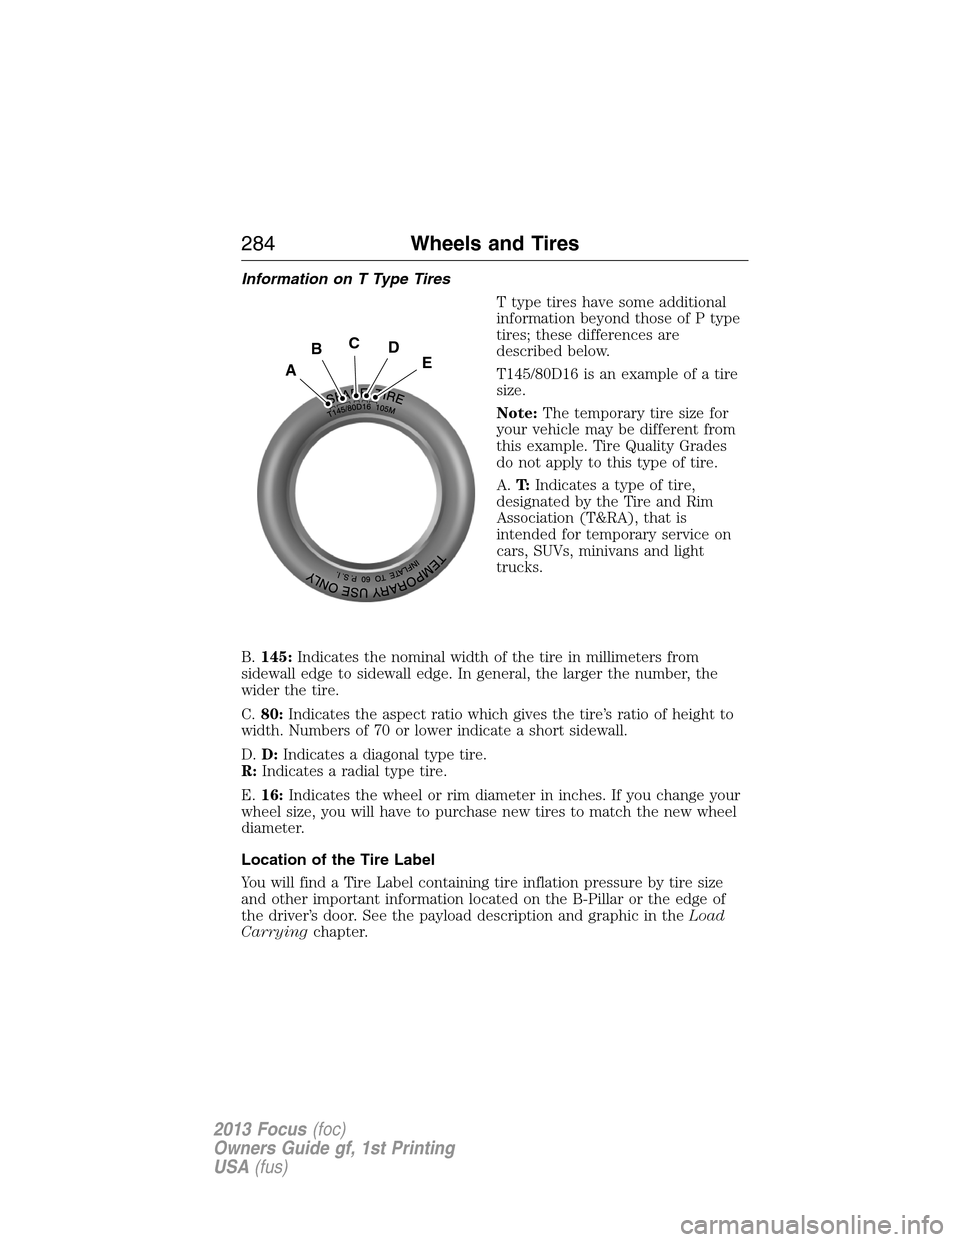 FORD FOCUS 2013 3.G Owners Manual Information on T Type Tires
T type tires have some additional
information beyond those of P type
tires; these differences are
described below.
T145/80D16 is an example of a tire
size.
Note:The tempora